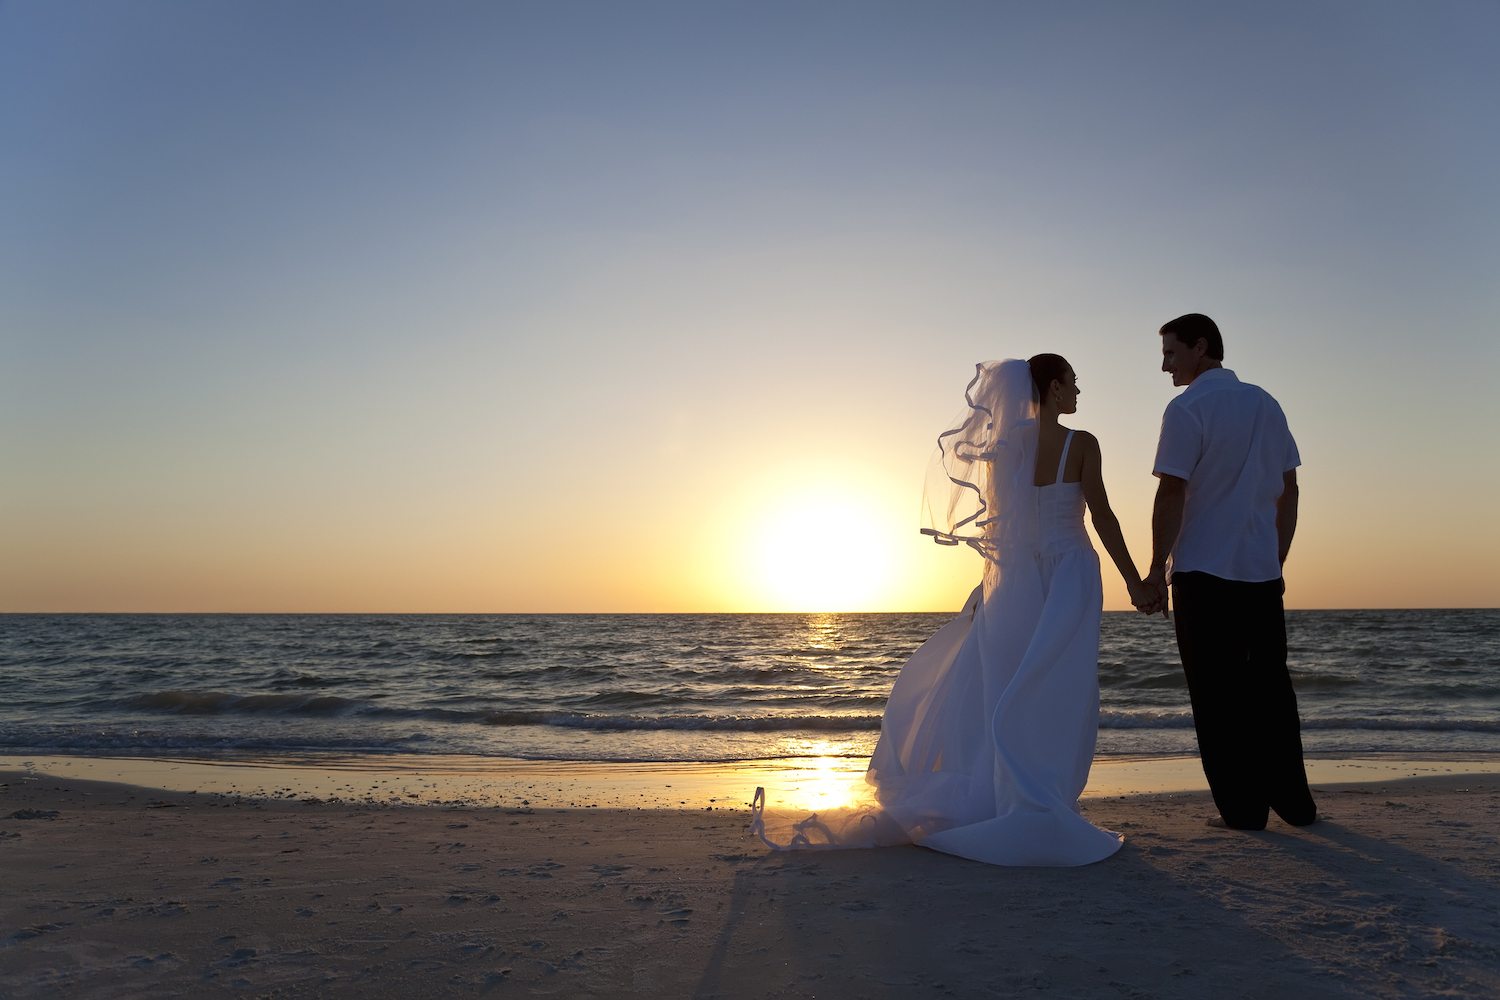 Destination Wedding Locations That Will Make You Want To Say “I Do!”